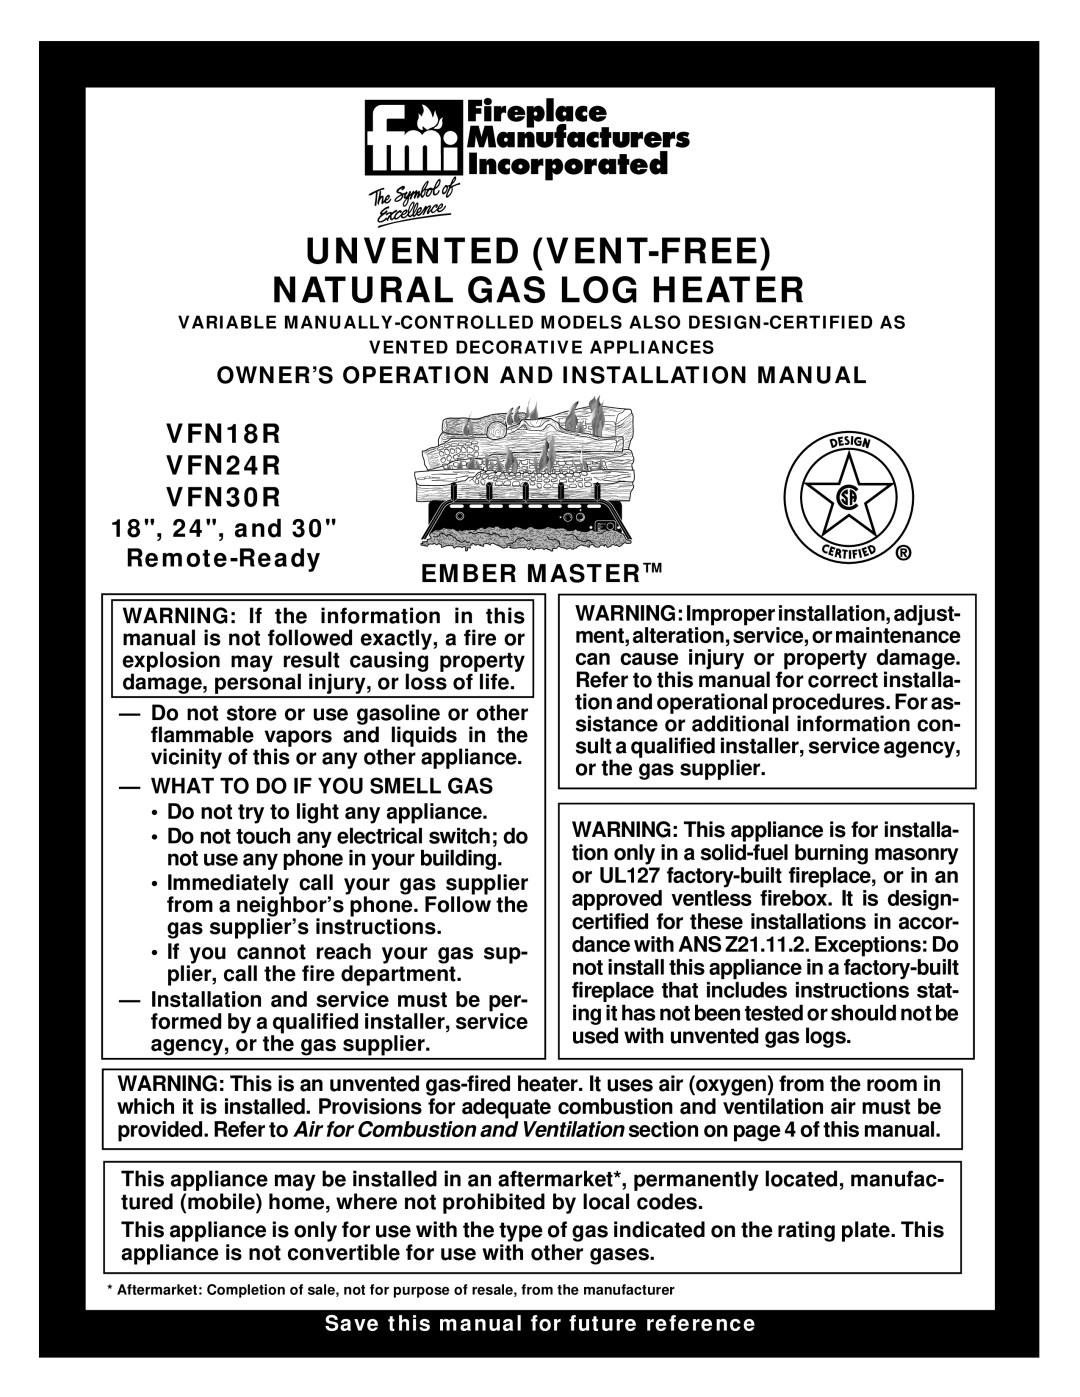 FMI VFN18R installation manual Unvented Vent-Free Natural Gas Log Heater, Owner’S Operation And Installation Manual 